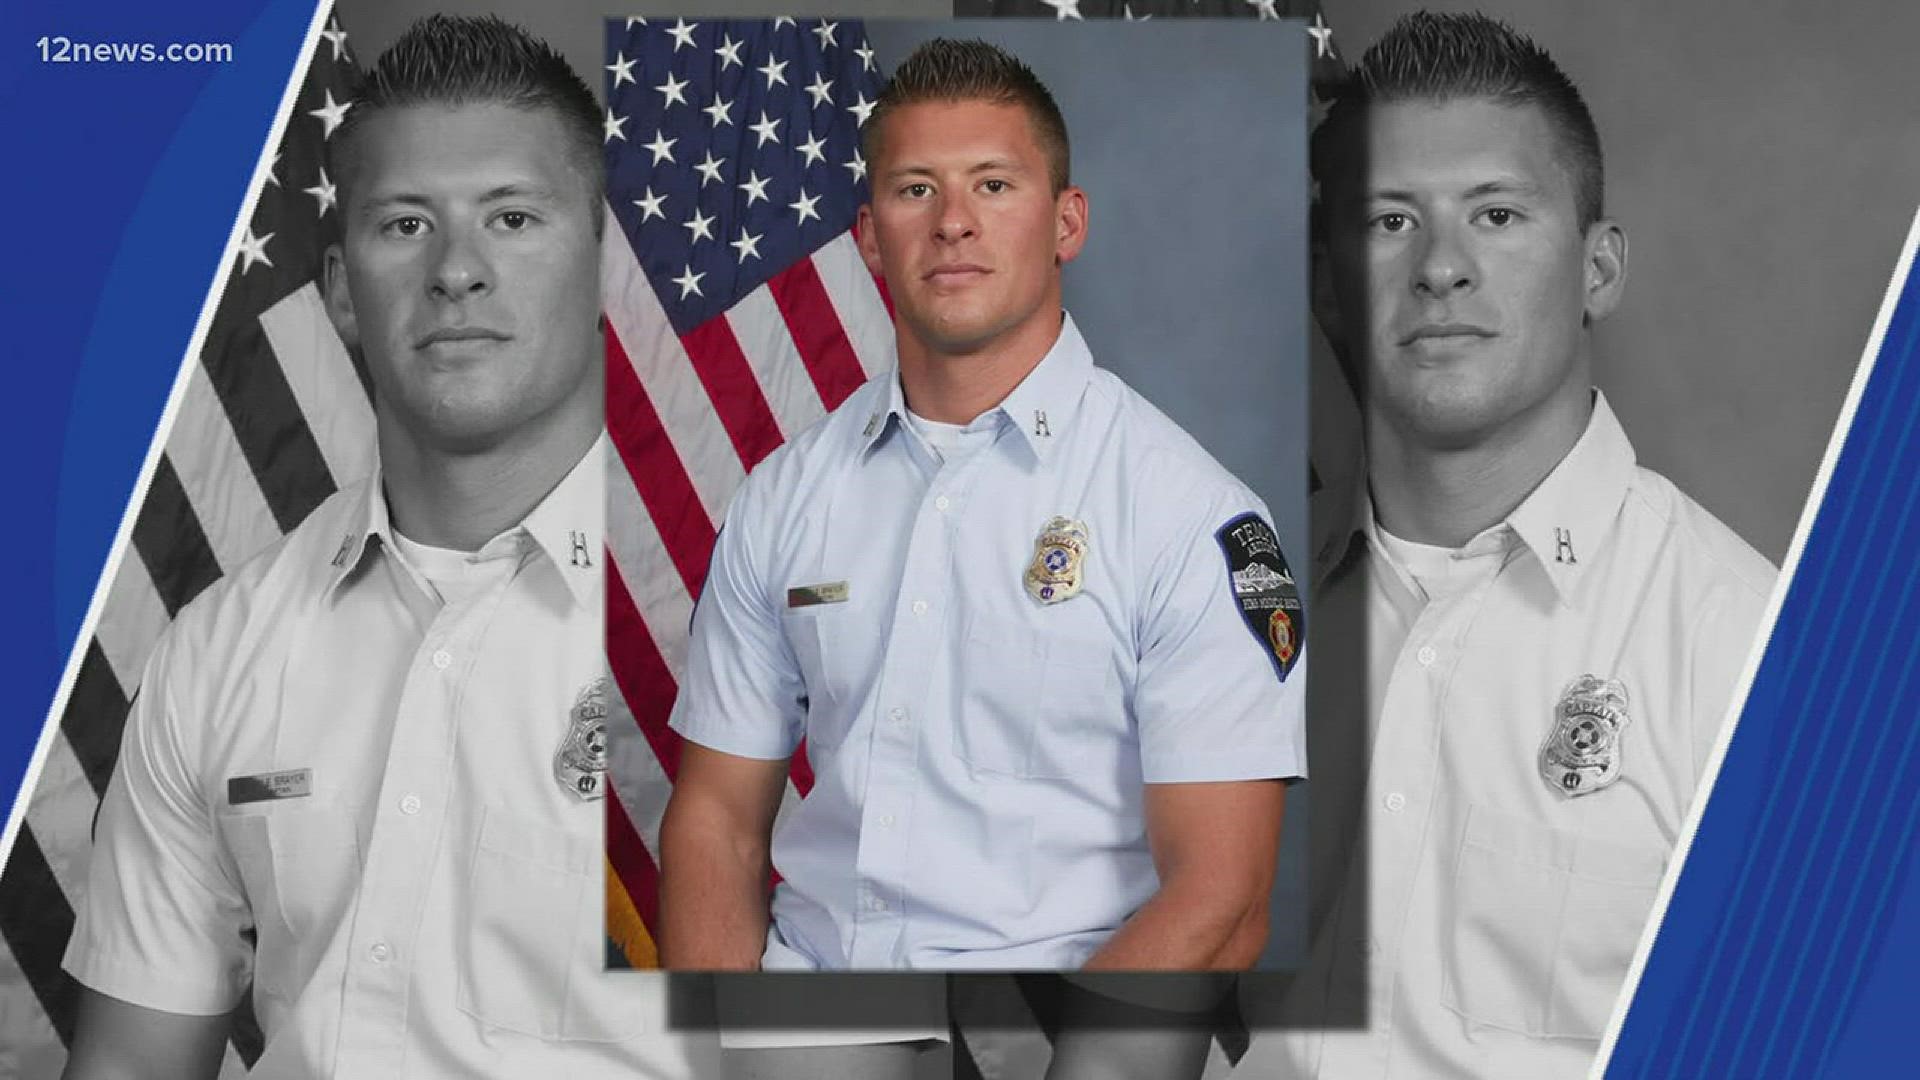 Captain Kyle Brayer was shot to death while off-duty at Old Town Scottsdale.